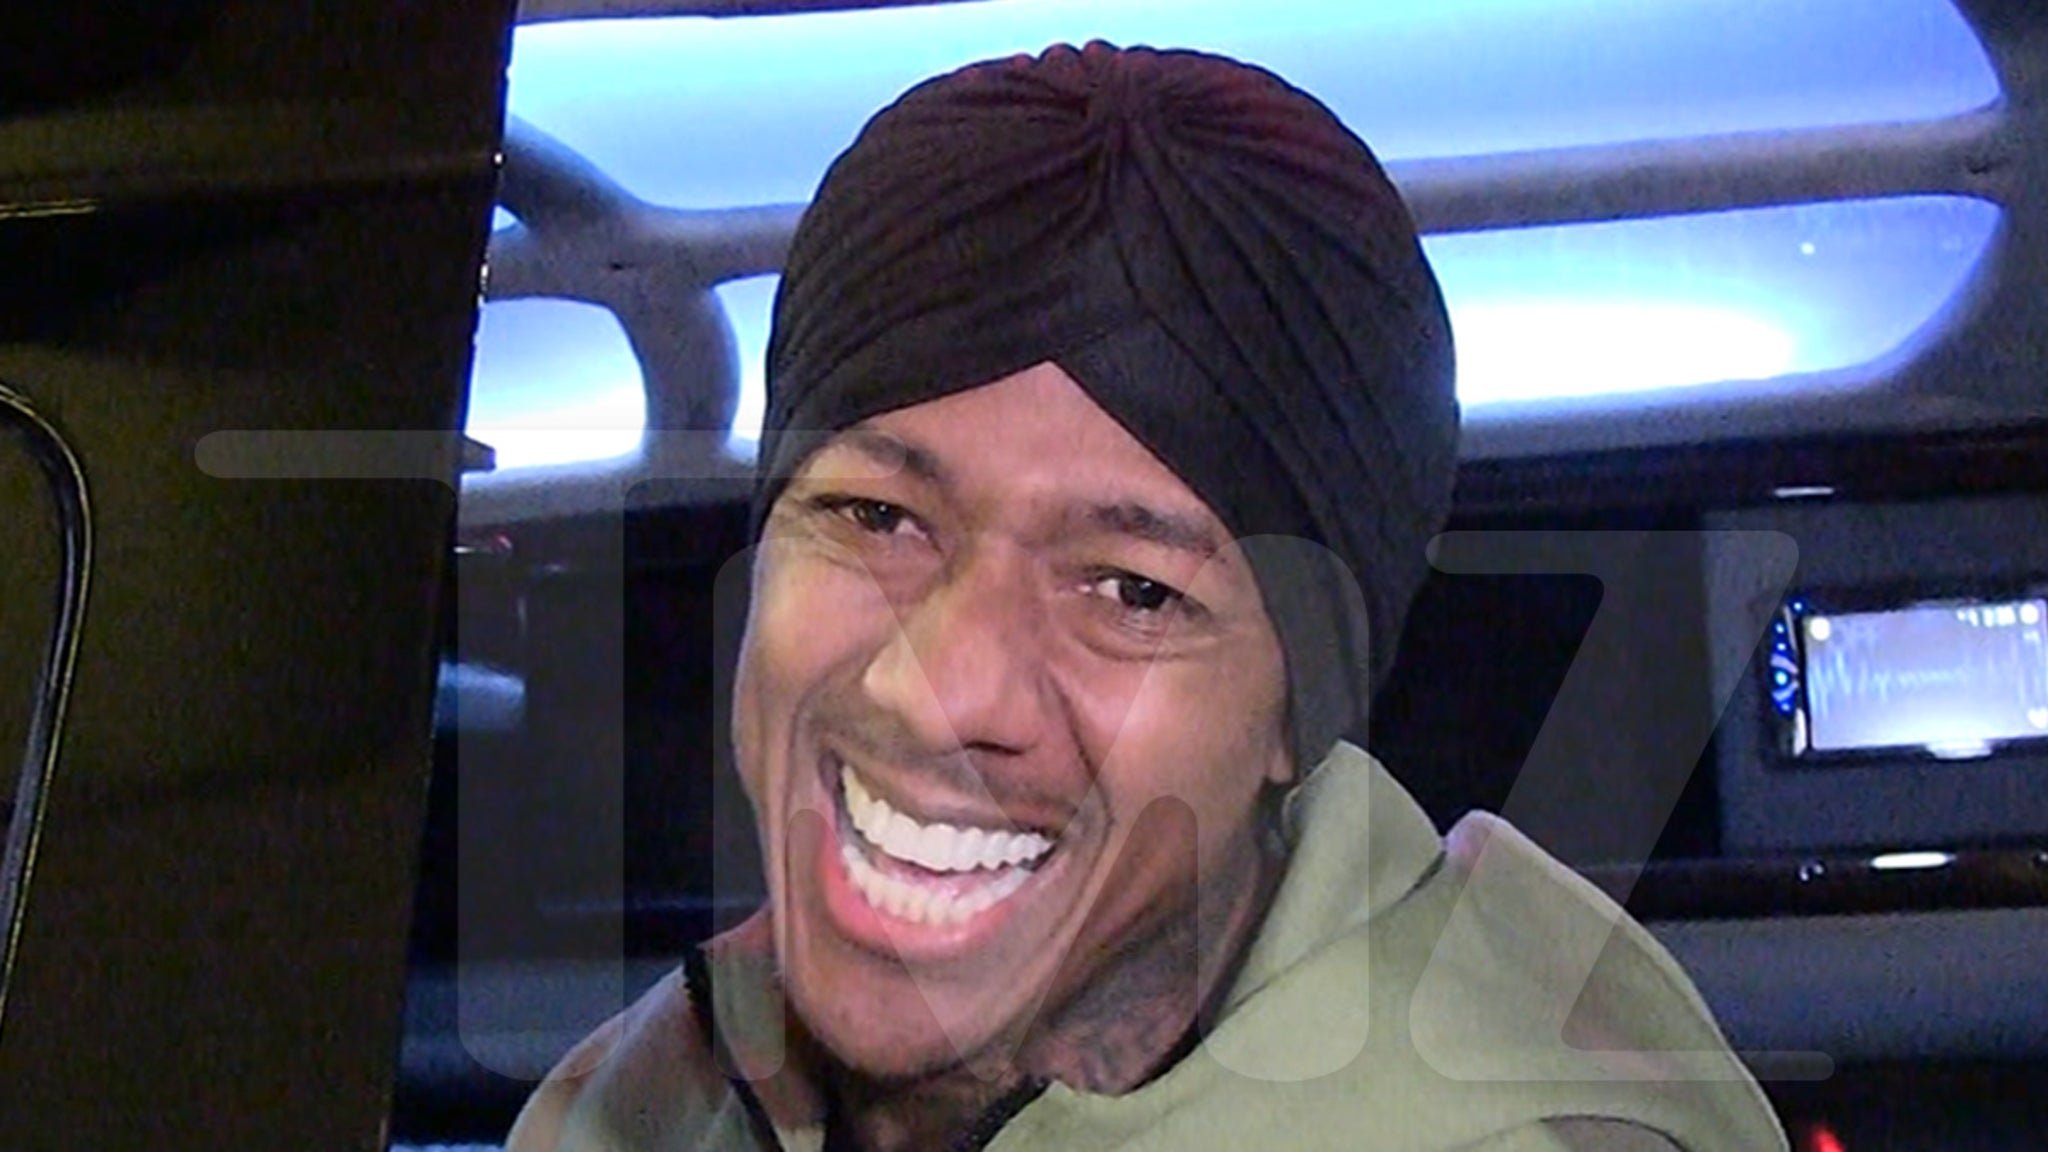 Nick Cannon I Got No Beef with Kimmel ... Oscars Joke Cool with Me!